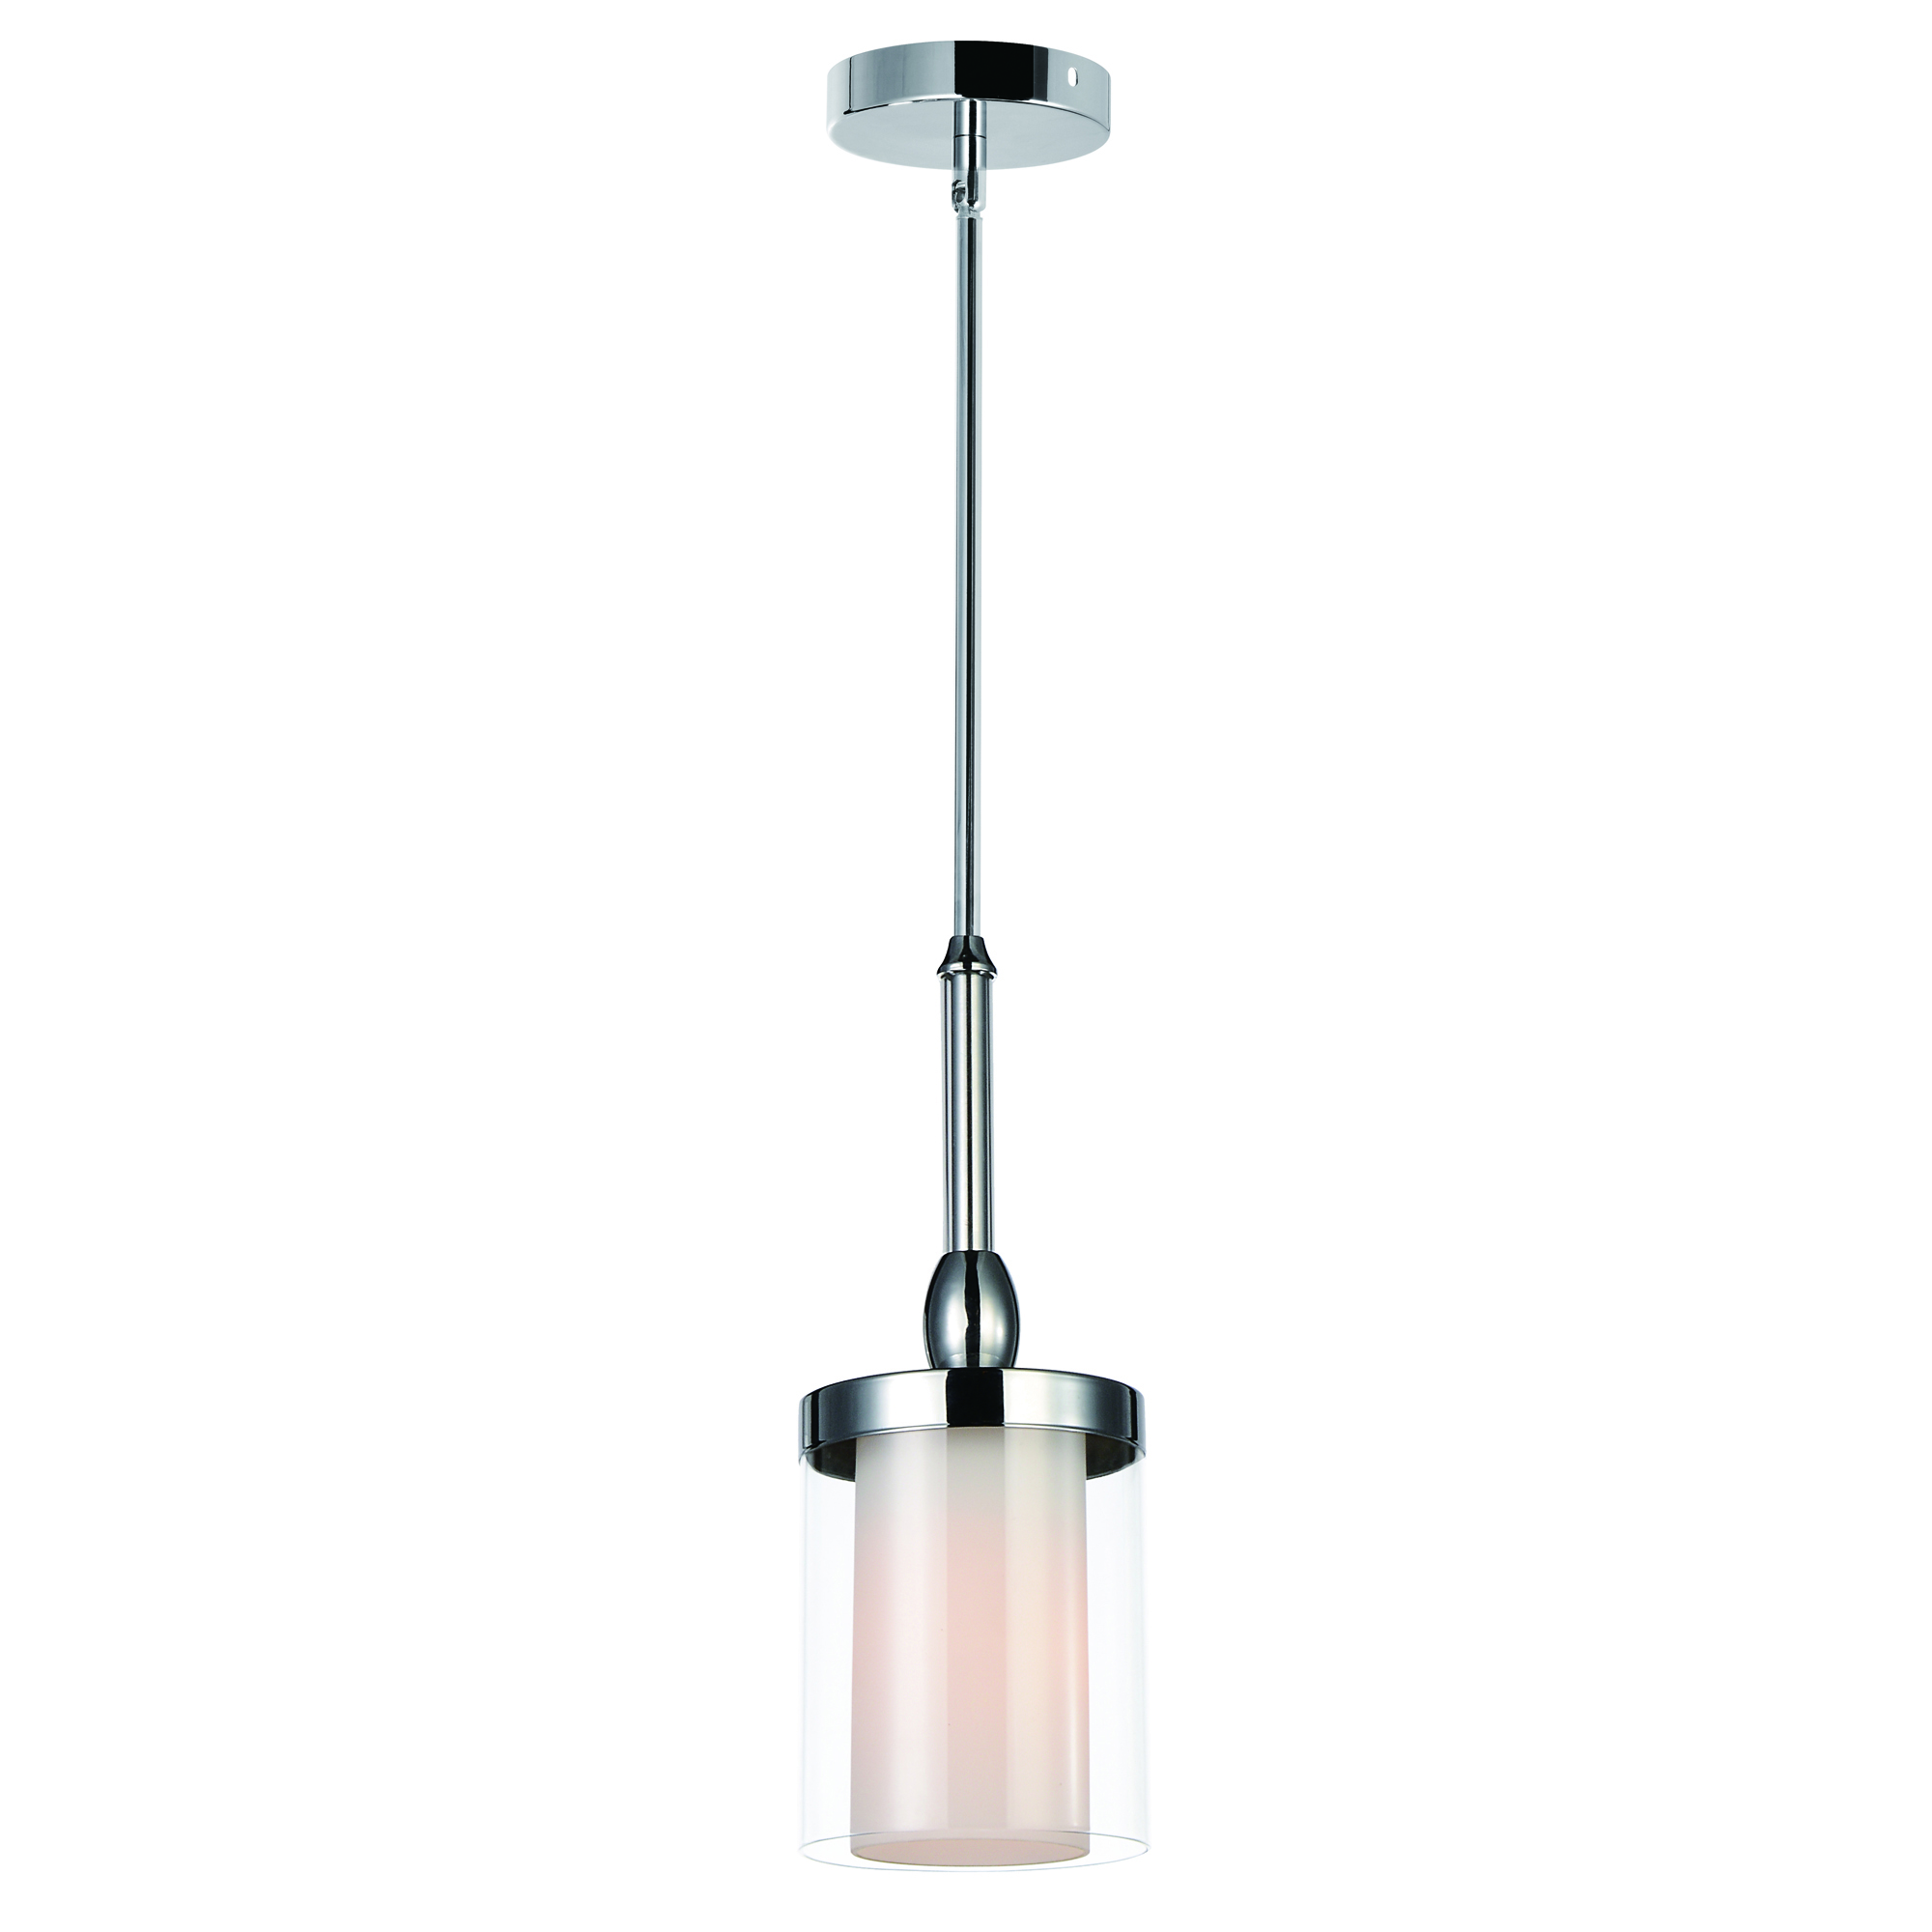 Maybelle 1 Light Candle Mini Chandelier With Chrome Finish